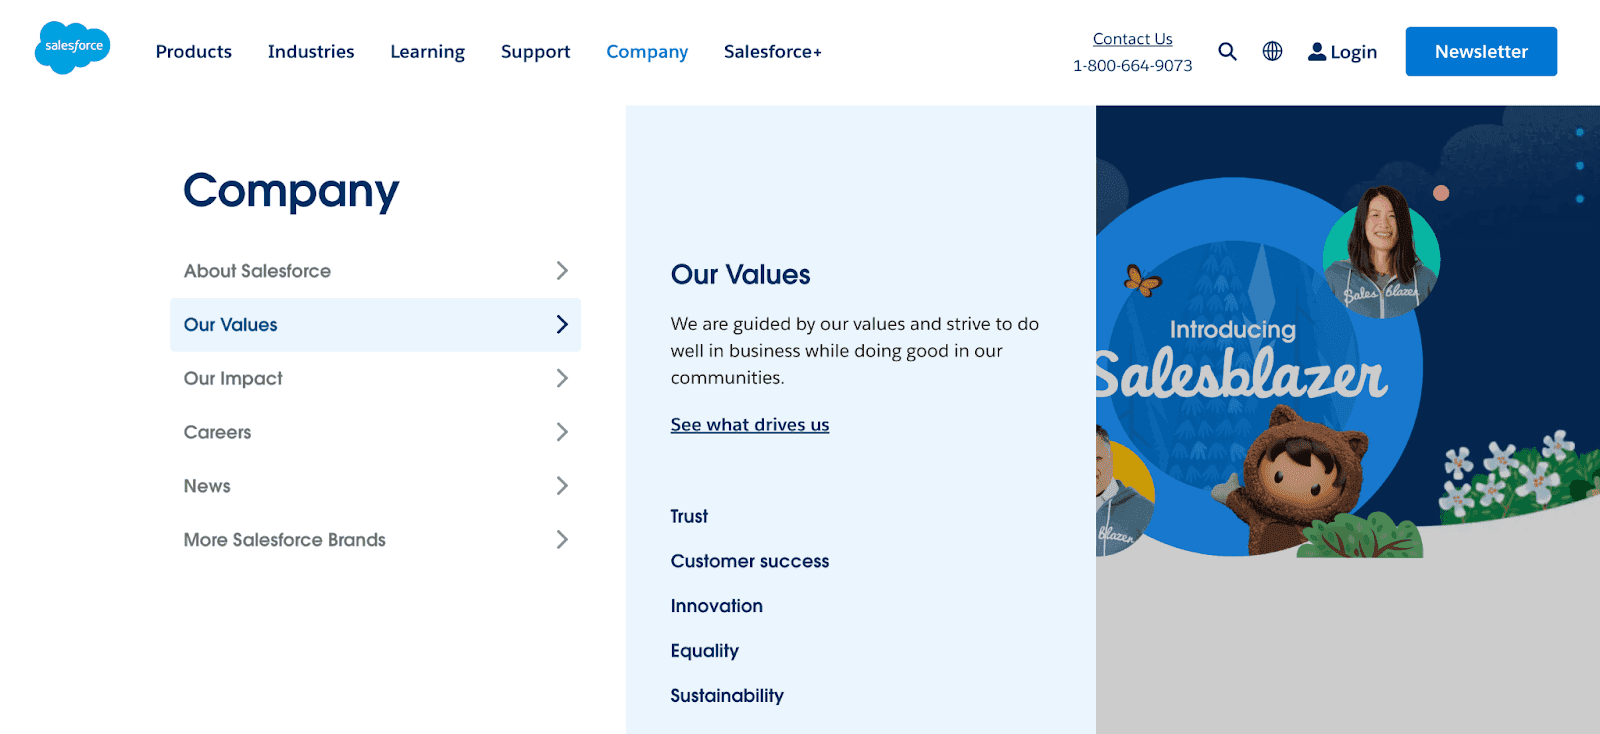 Salesforce has five values listed as trust, customer success, innovation, equality, and sustainability.